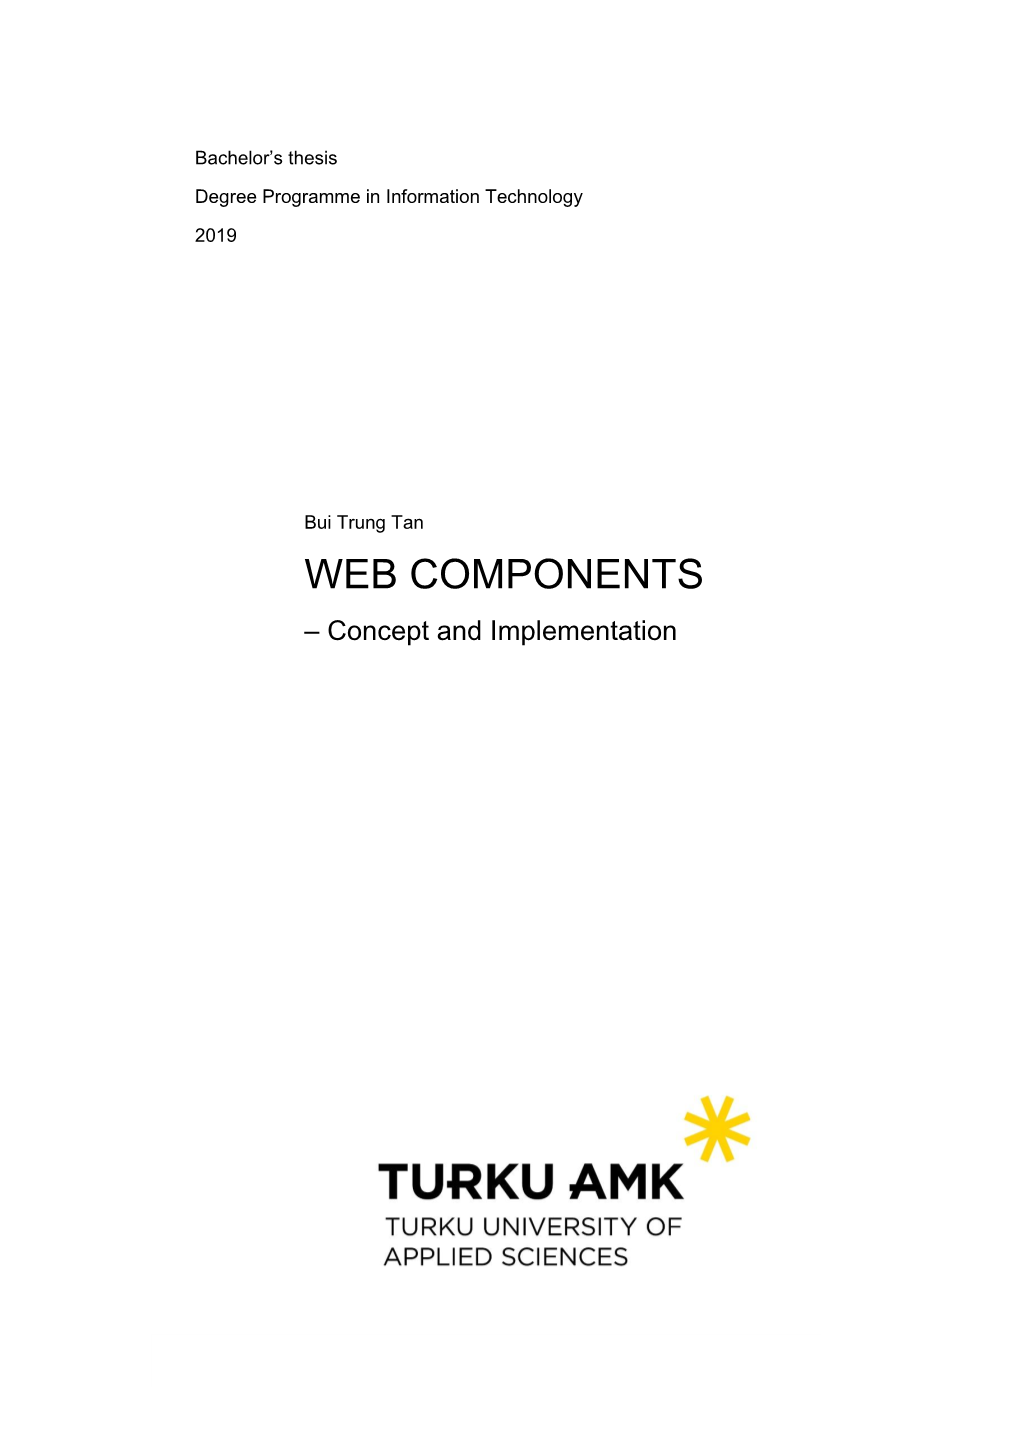 WEB COMPONENTS – Concept and Implementation